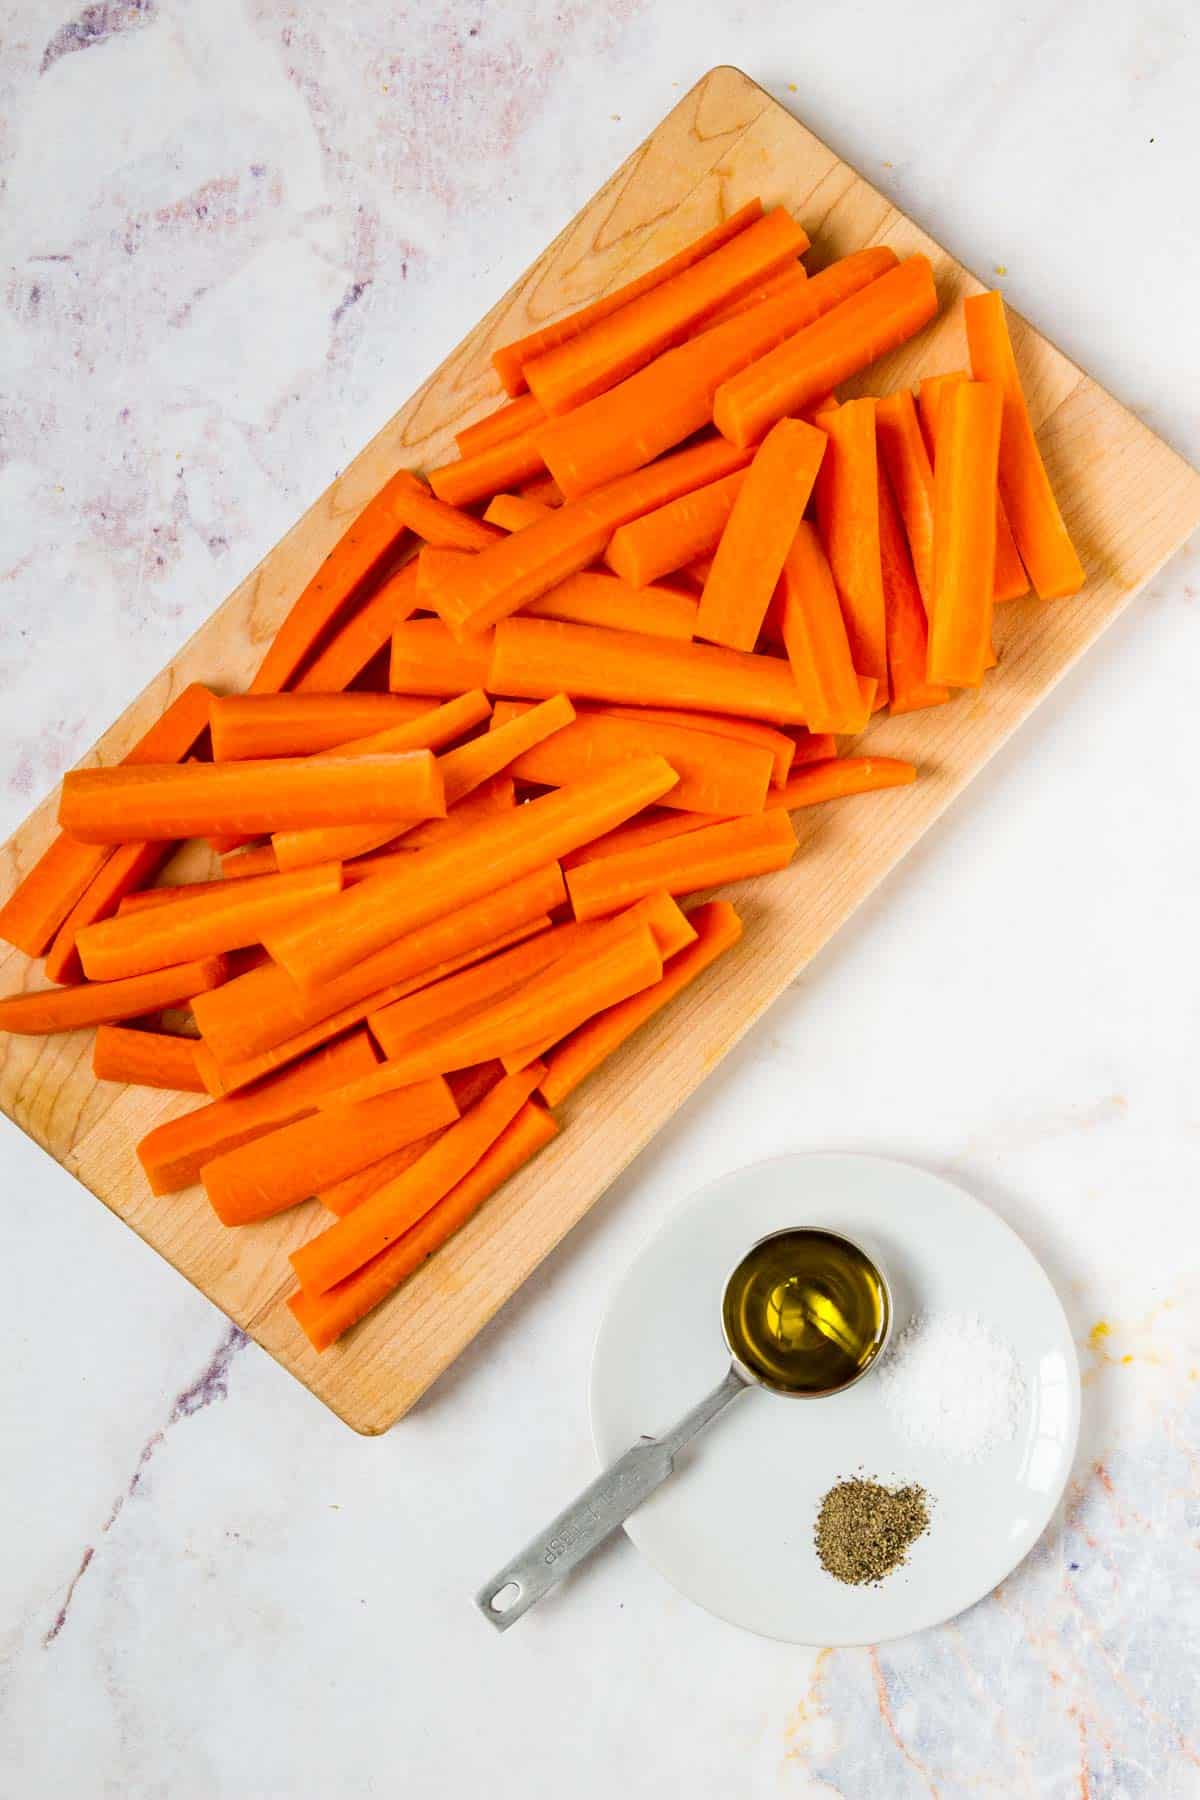 Carrots cut into 2-3 inch sticks on a cutting board next to a tablespoon and seasonings.